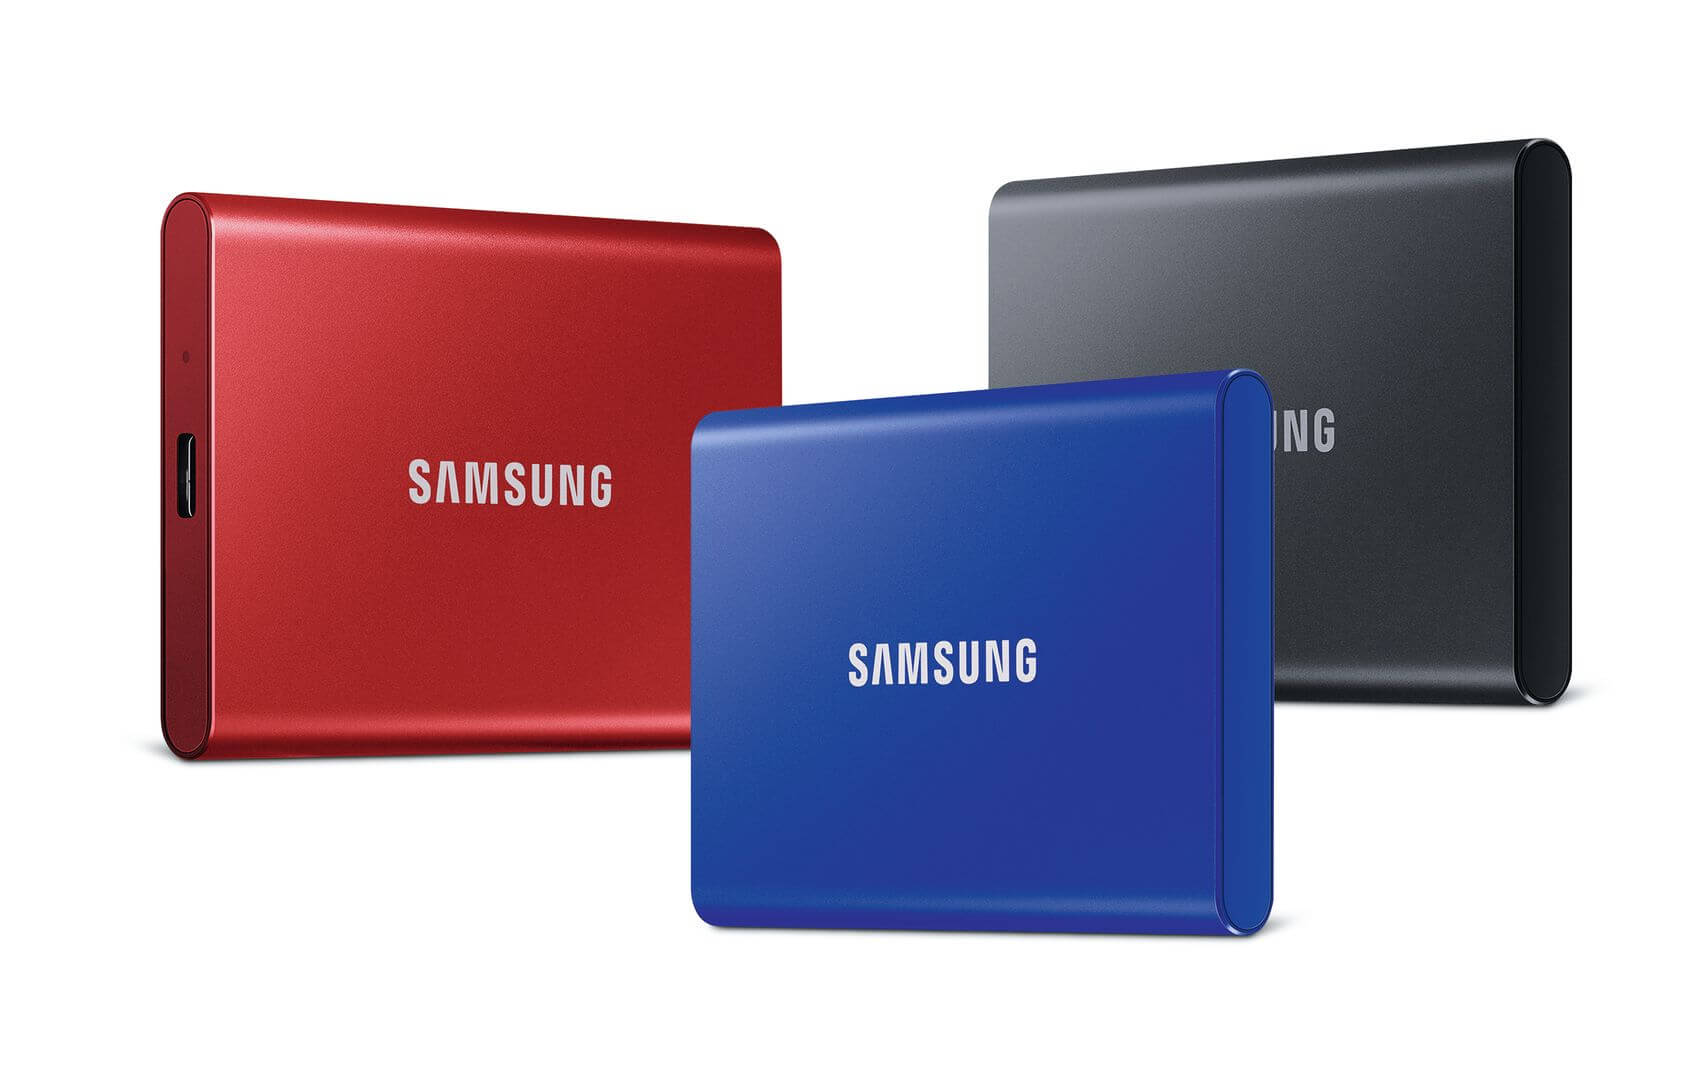 What Is The Function Of Samsung Portable SSD Daemon?